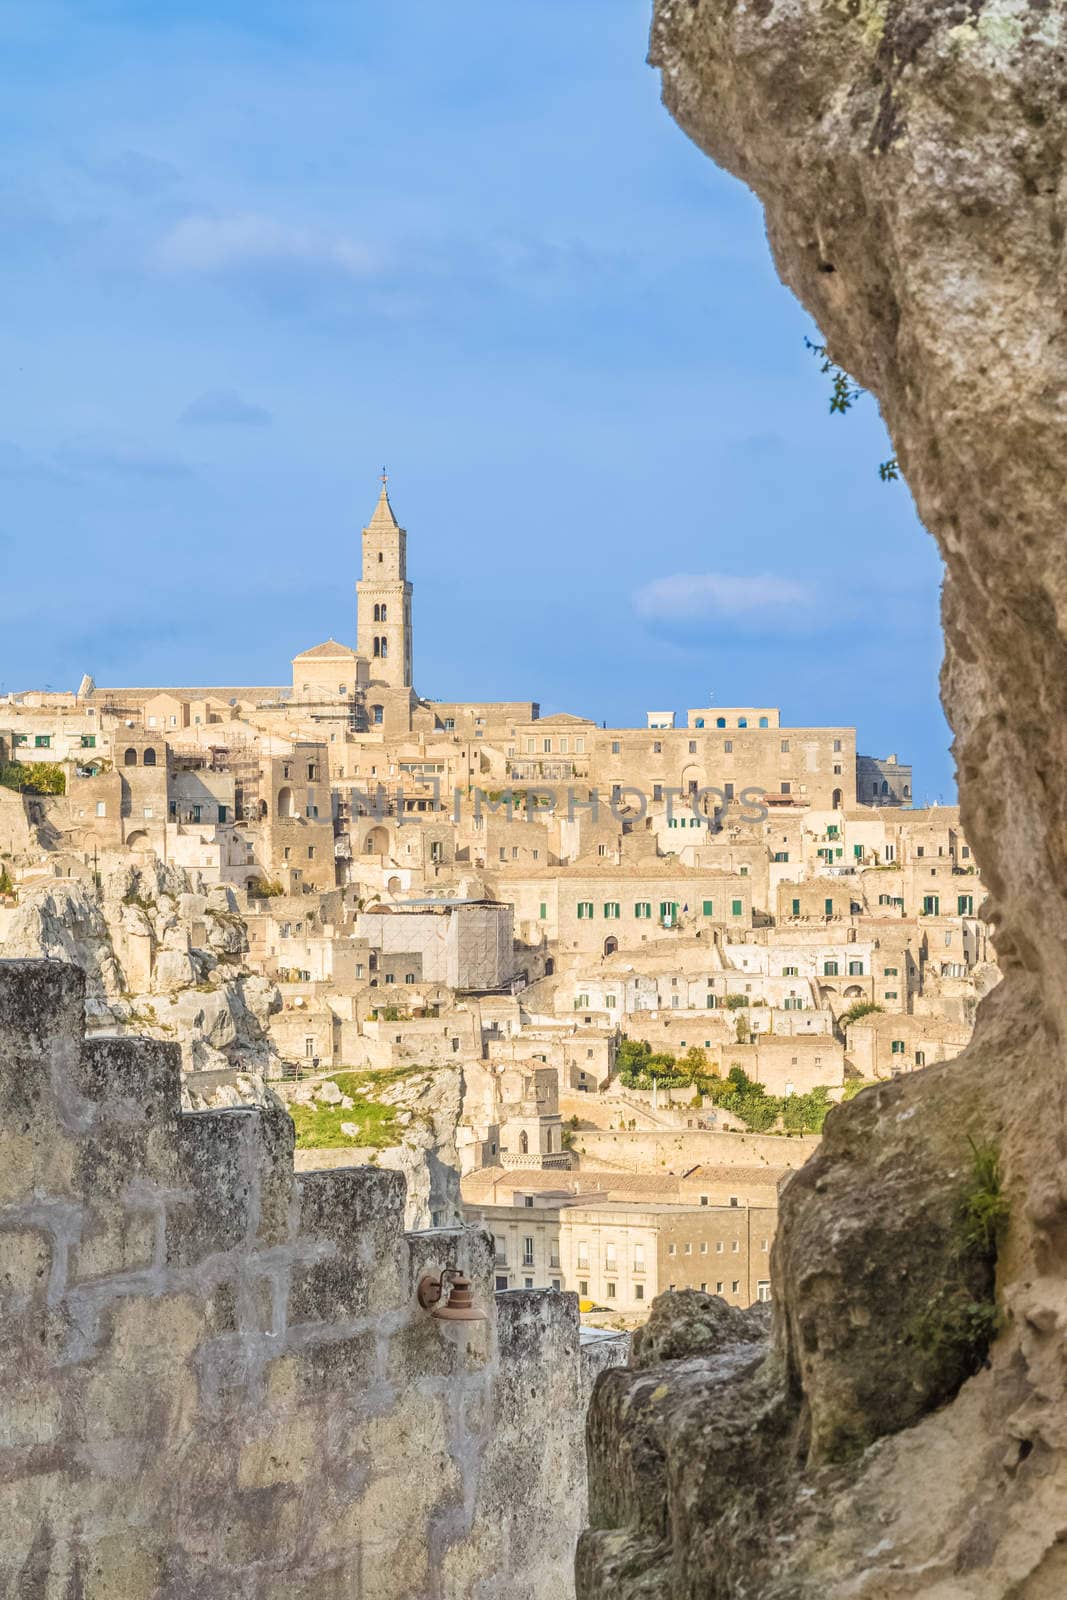 view of typical stones (Sassi di Matera) and church of Matera UNESCO European Capital of Culture 2019 under blue sky. Basilicata, Italy